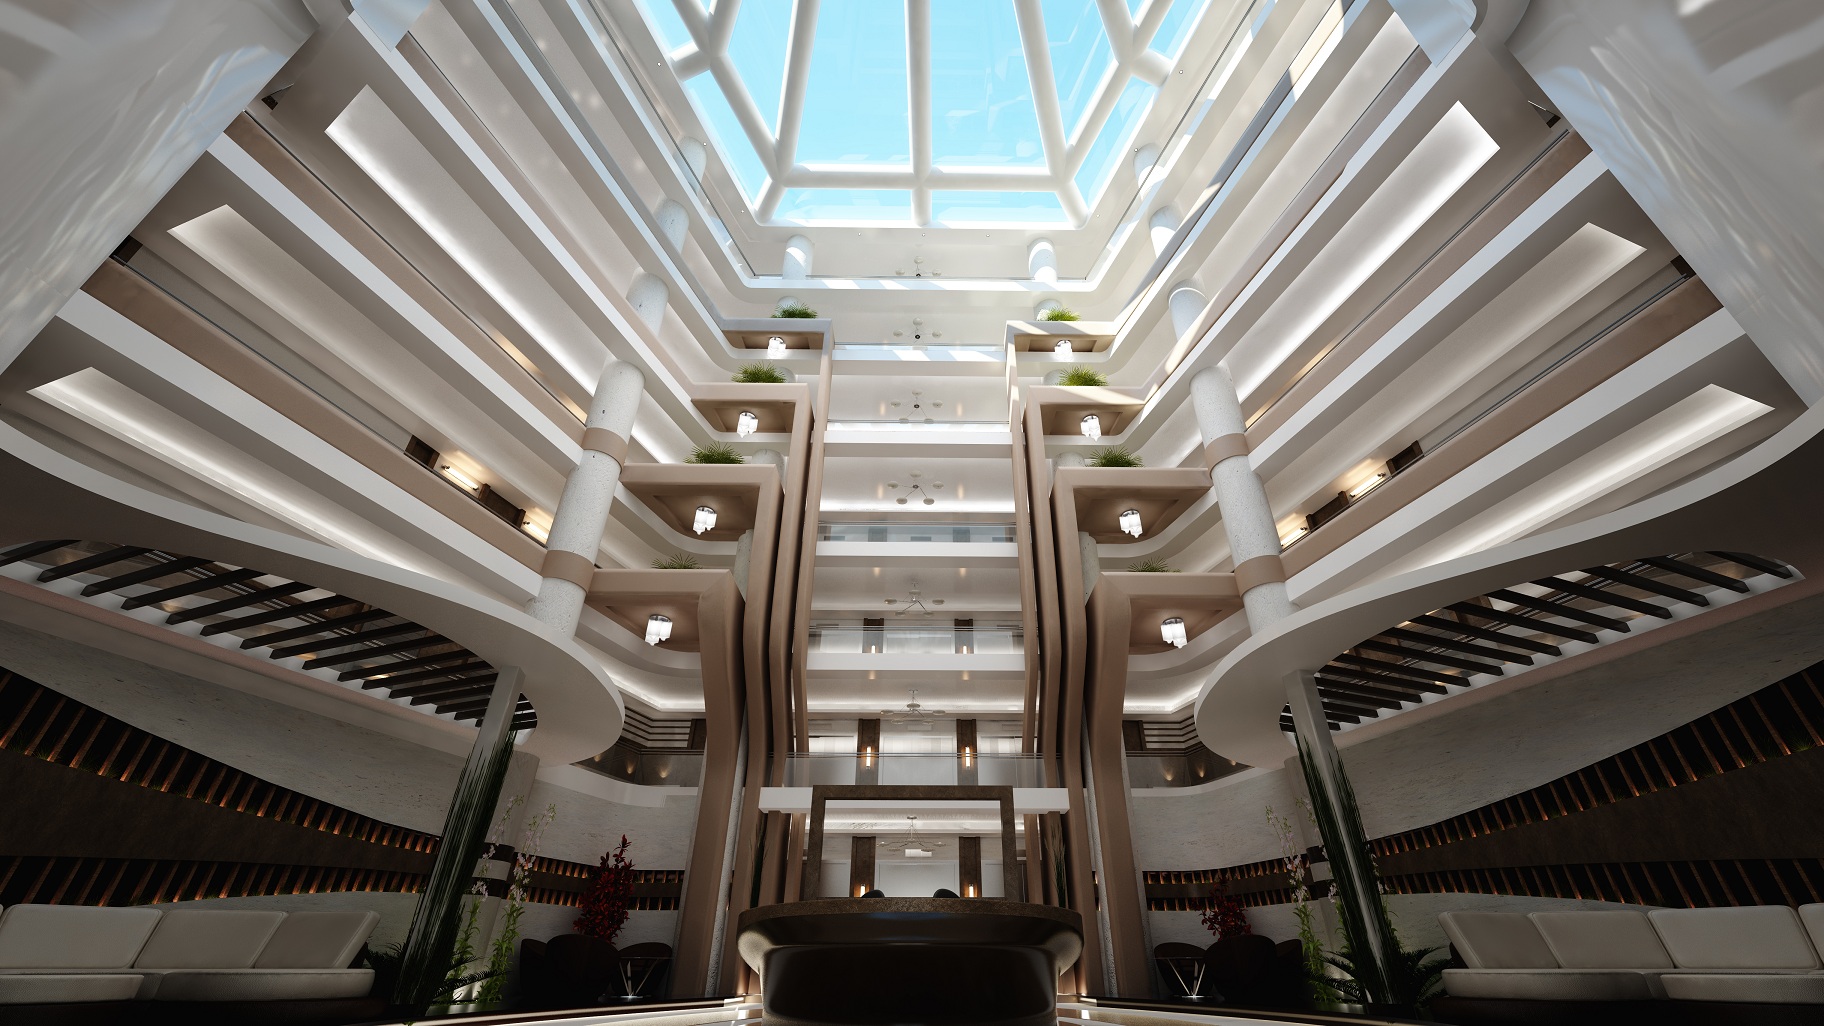 With an area of 180 m², book your administrative unit in Cairo Capital Center Mall from Catalyst